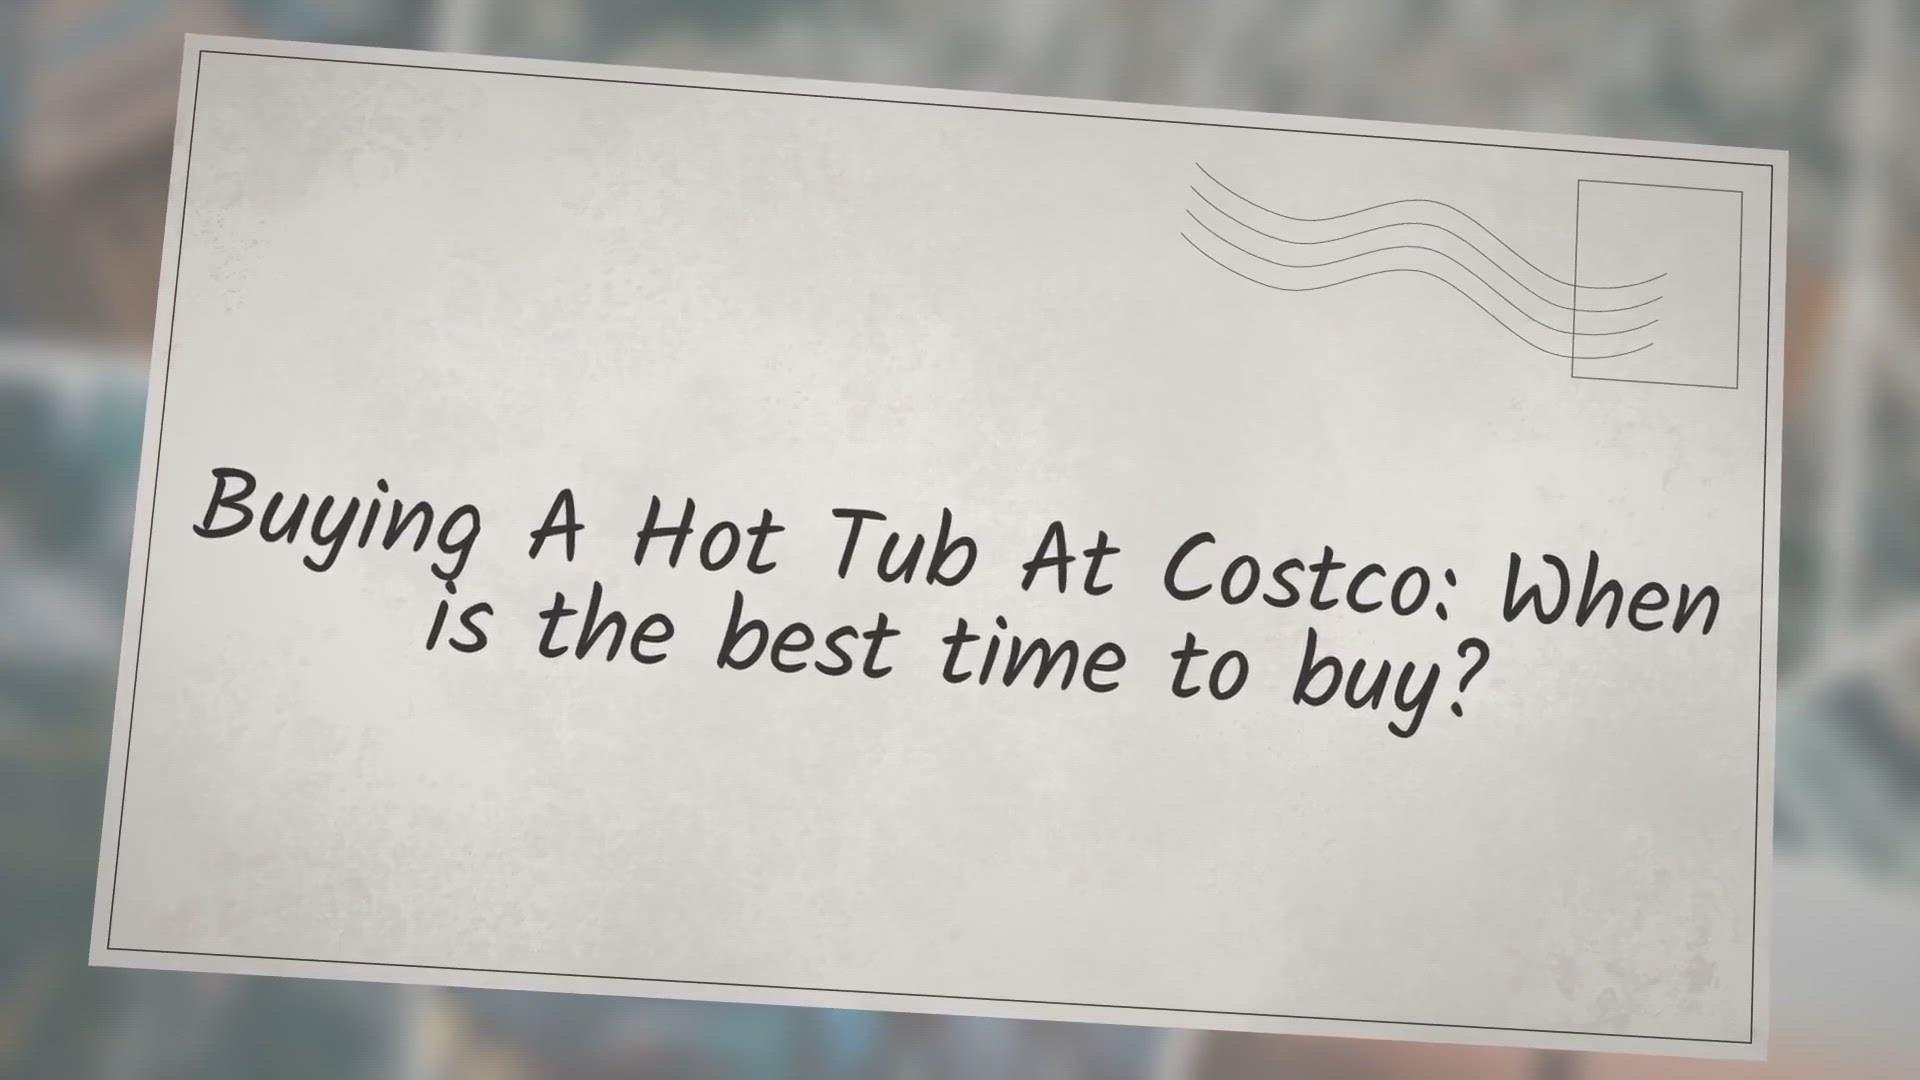 'Video thumbnail for Buying A Hot Tub At Costco: When is the best time to buy?'